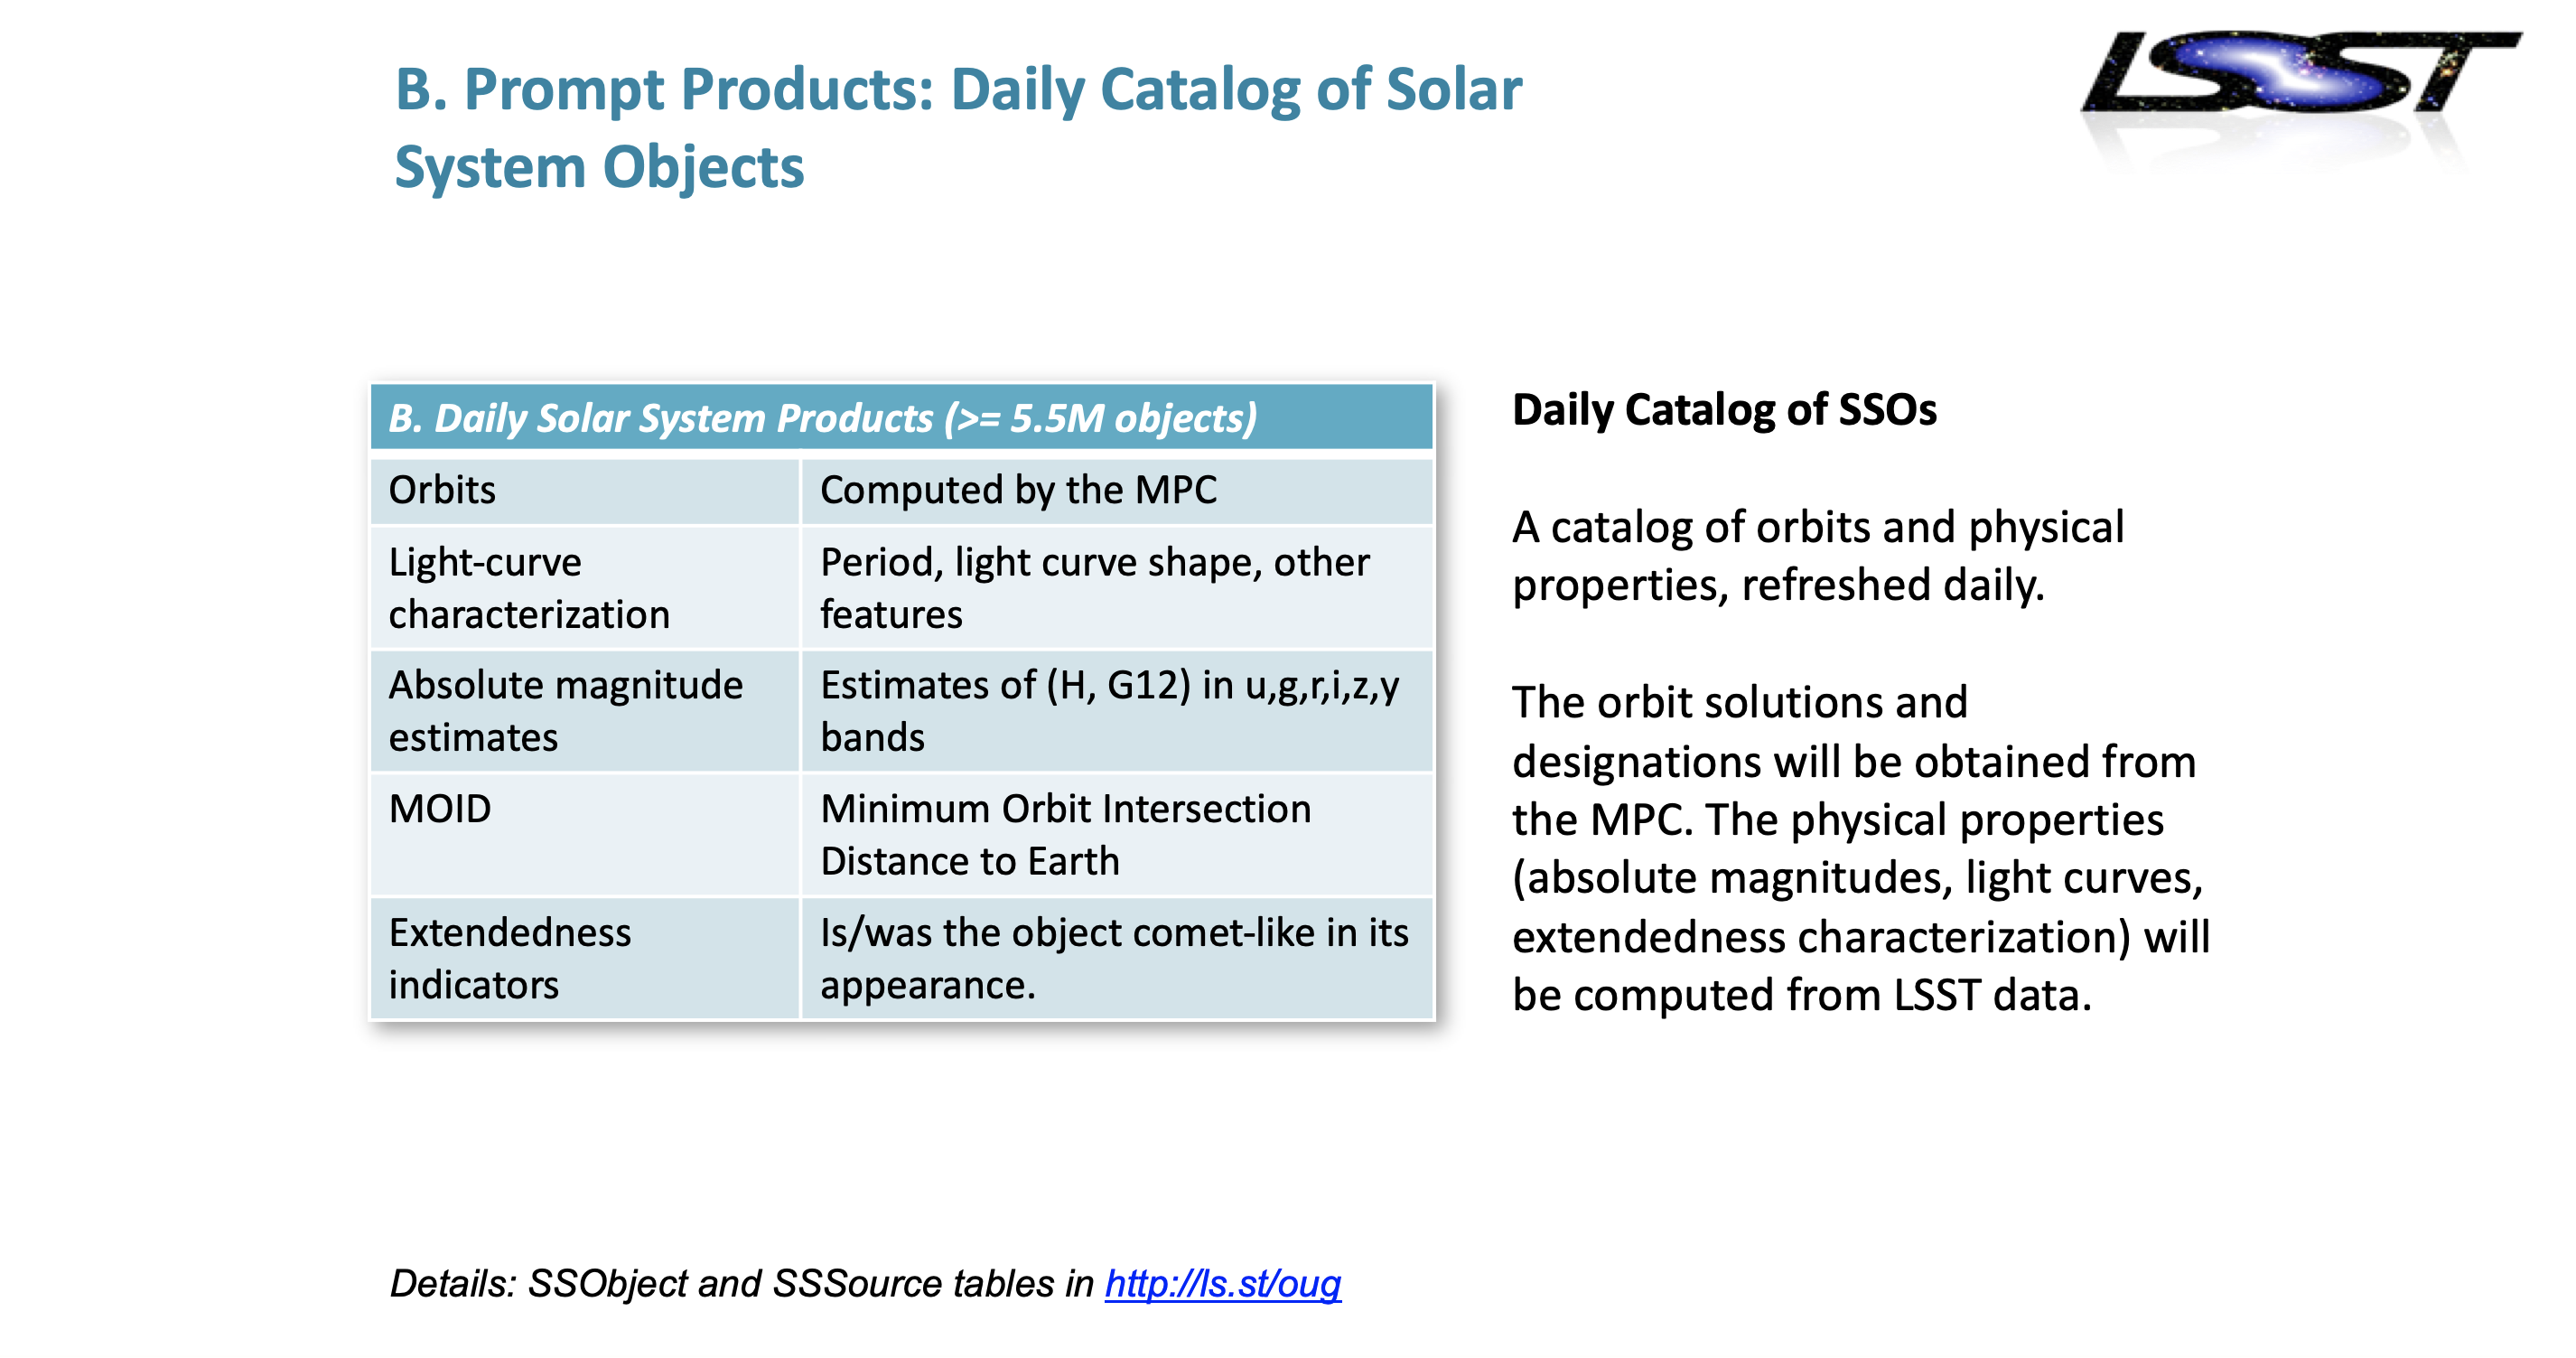 Daily Solar System Catalog Structure